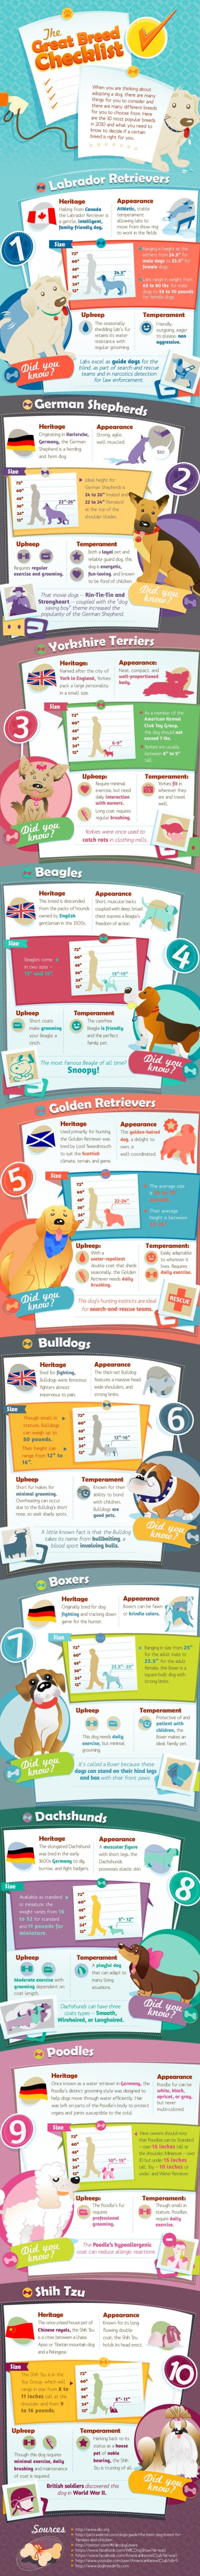 The great breed checklist